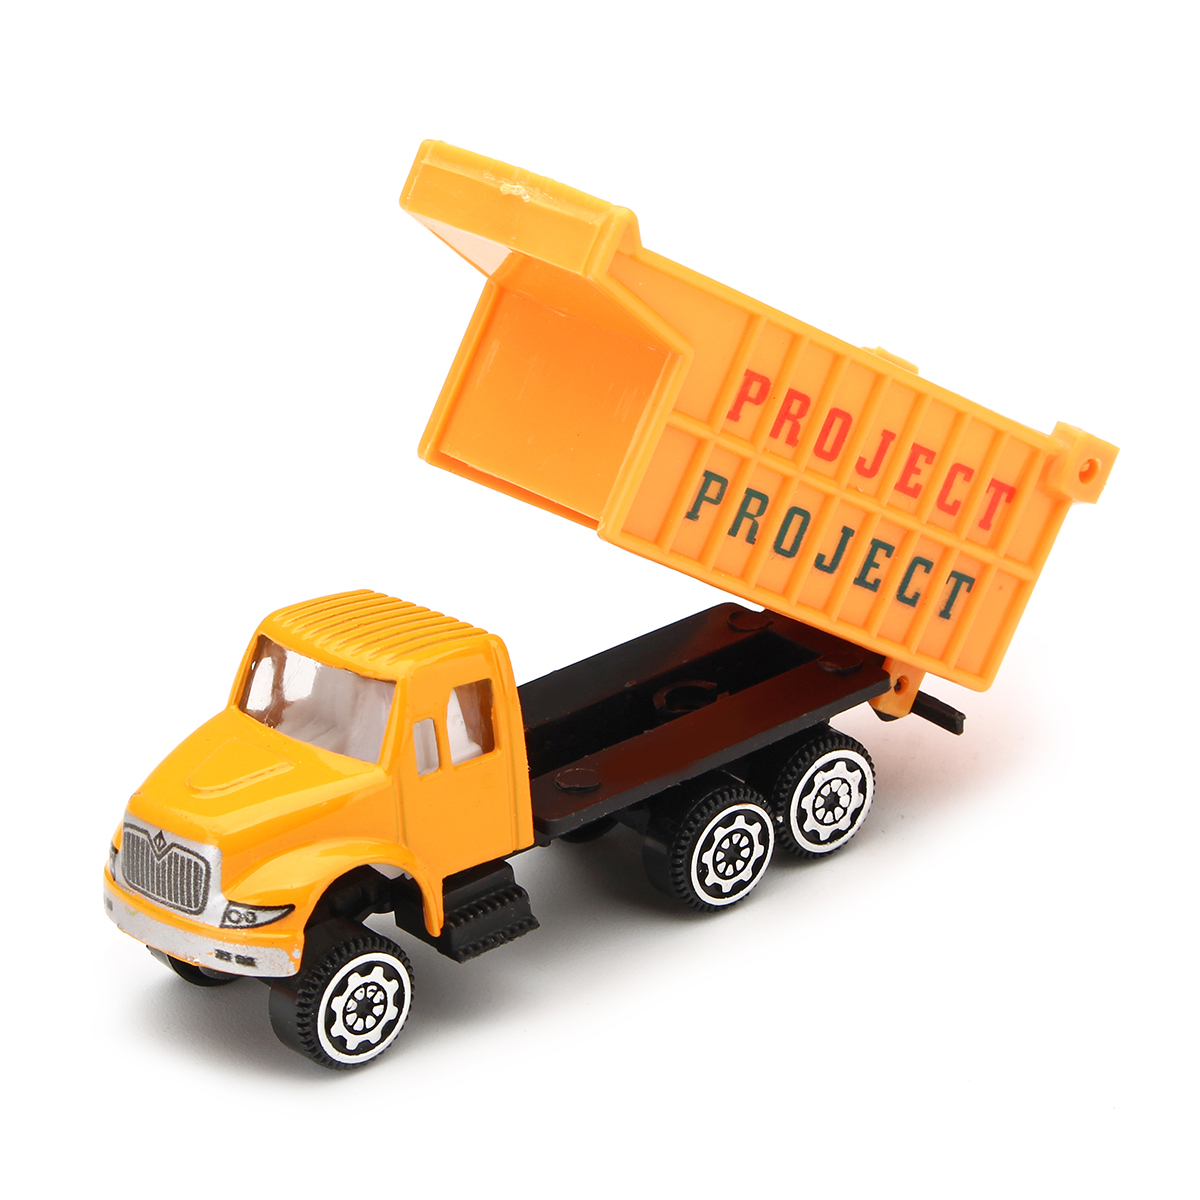 4in1-Kids-Toy-Recovery-Vehicle-Tow-Truck-Lorry-Low-Loader-Diecast-Model-Toys-Construction-Xmas-1414450-7